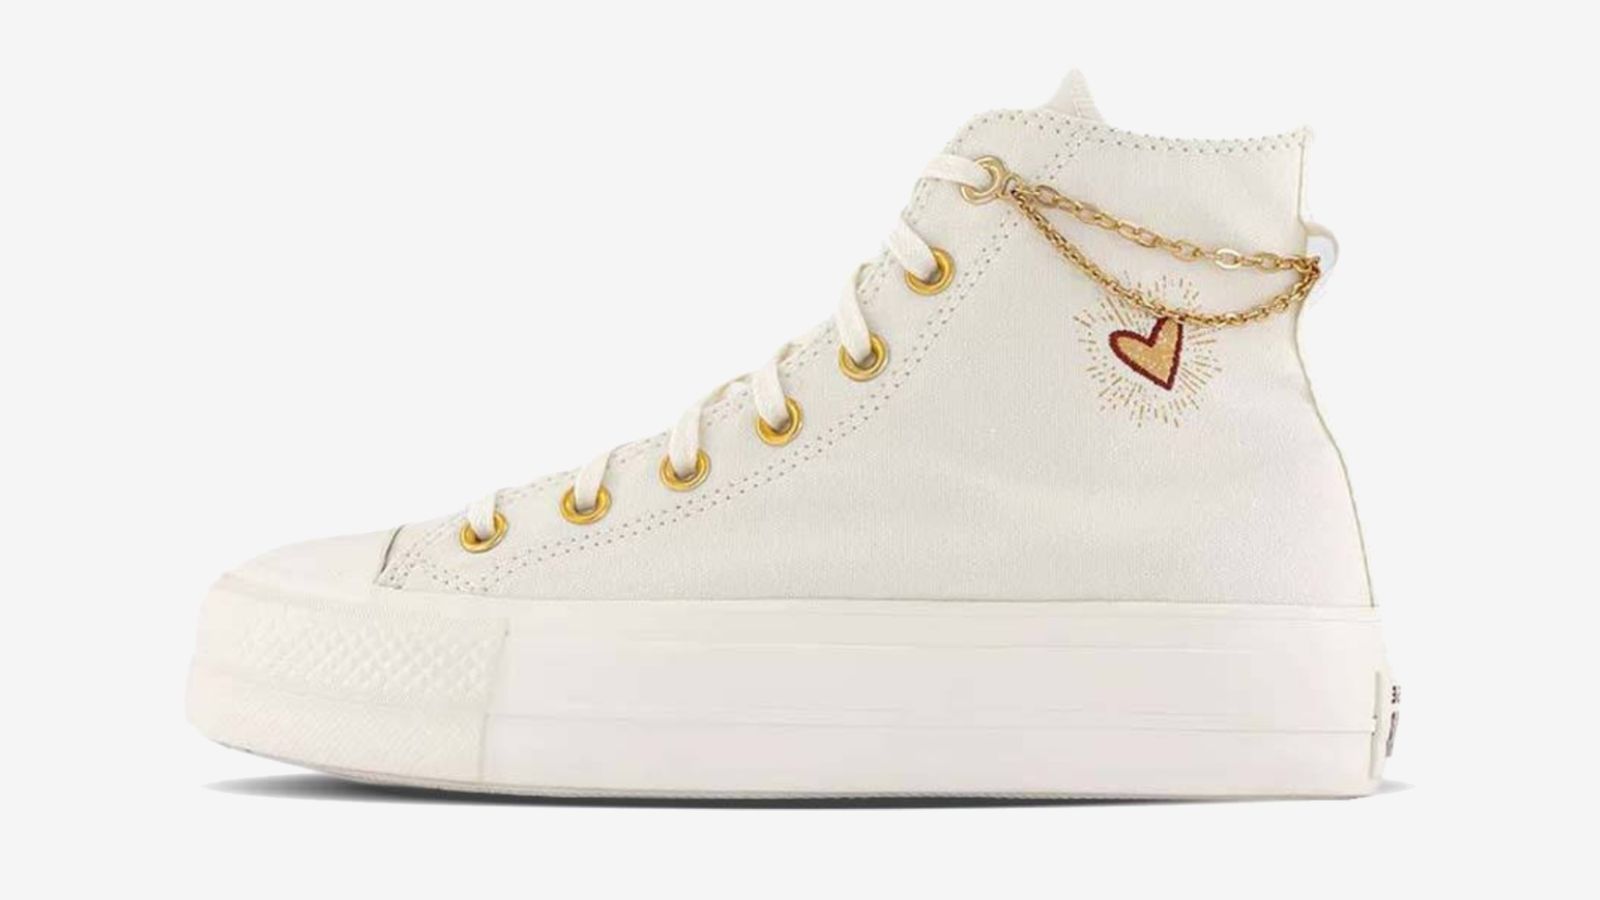 Converse Chuck Taylor Lift Platform Hi "Gold Chain" product image of an erget-coloured high-top with a gold chain around the ankle and a golden heart stitched to the side.